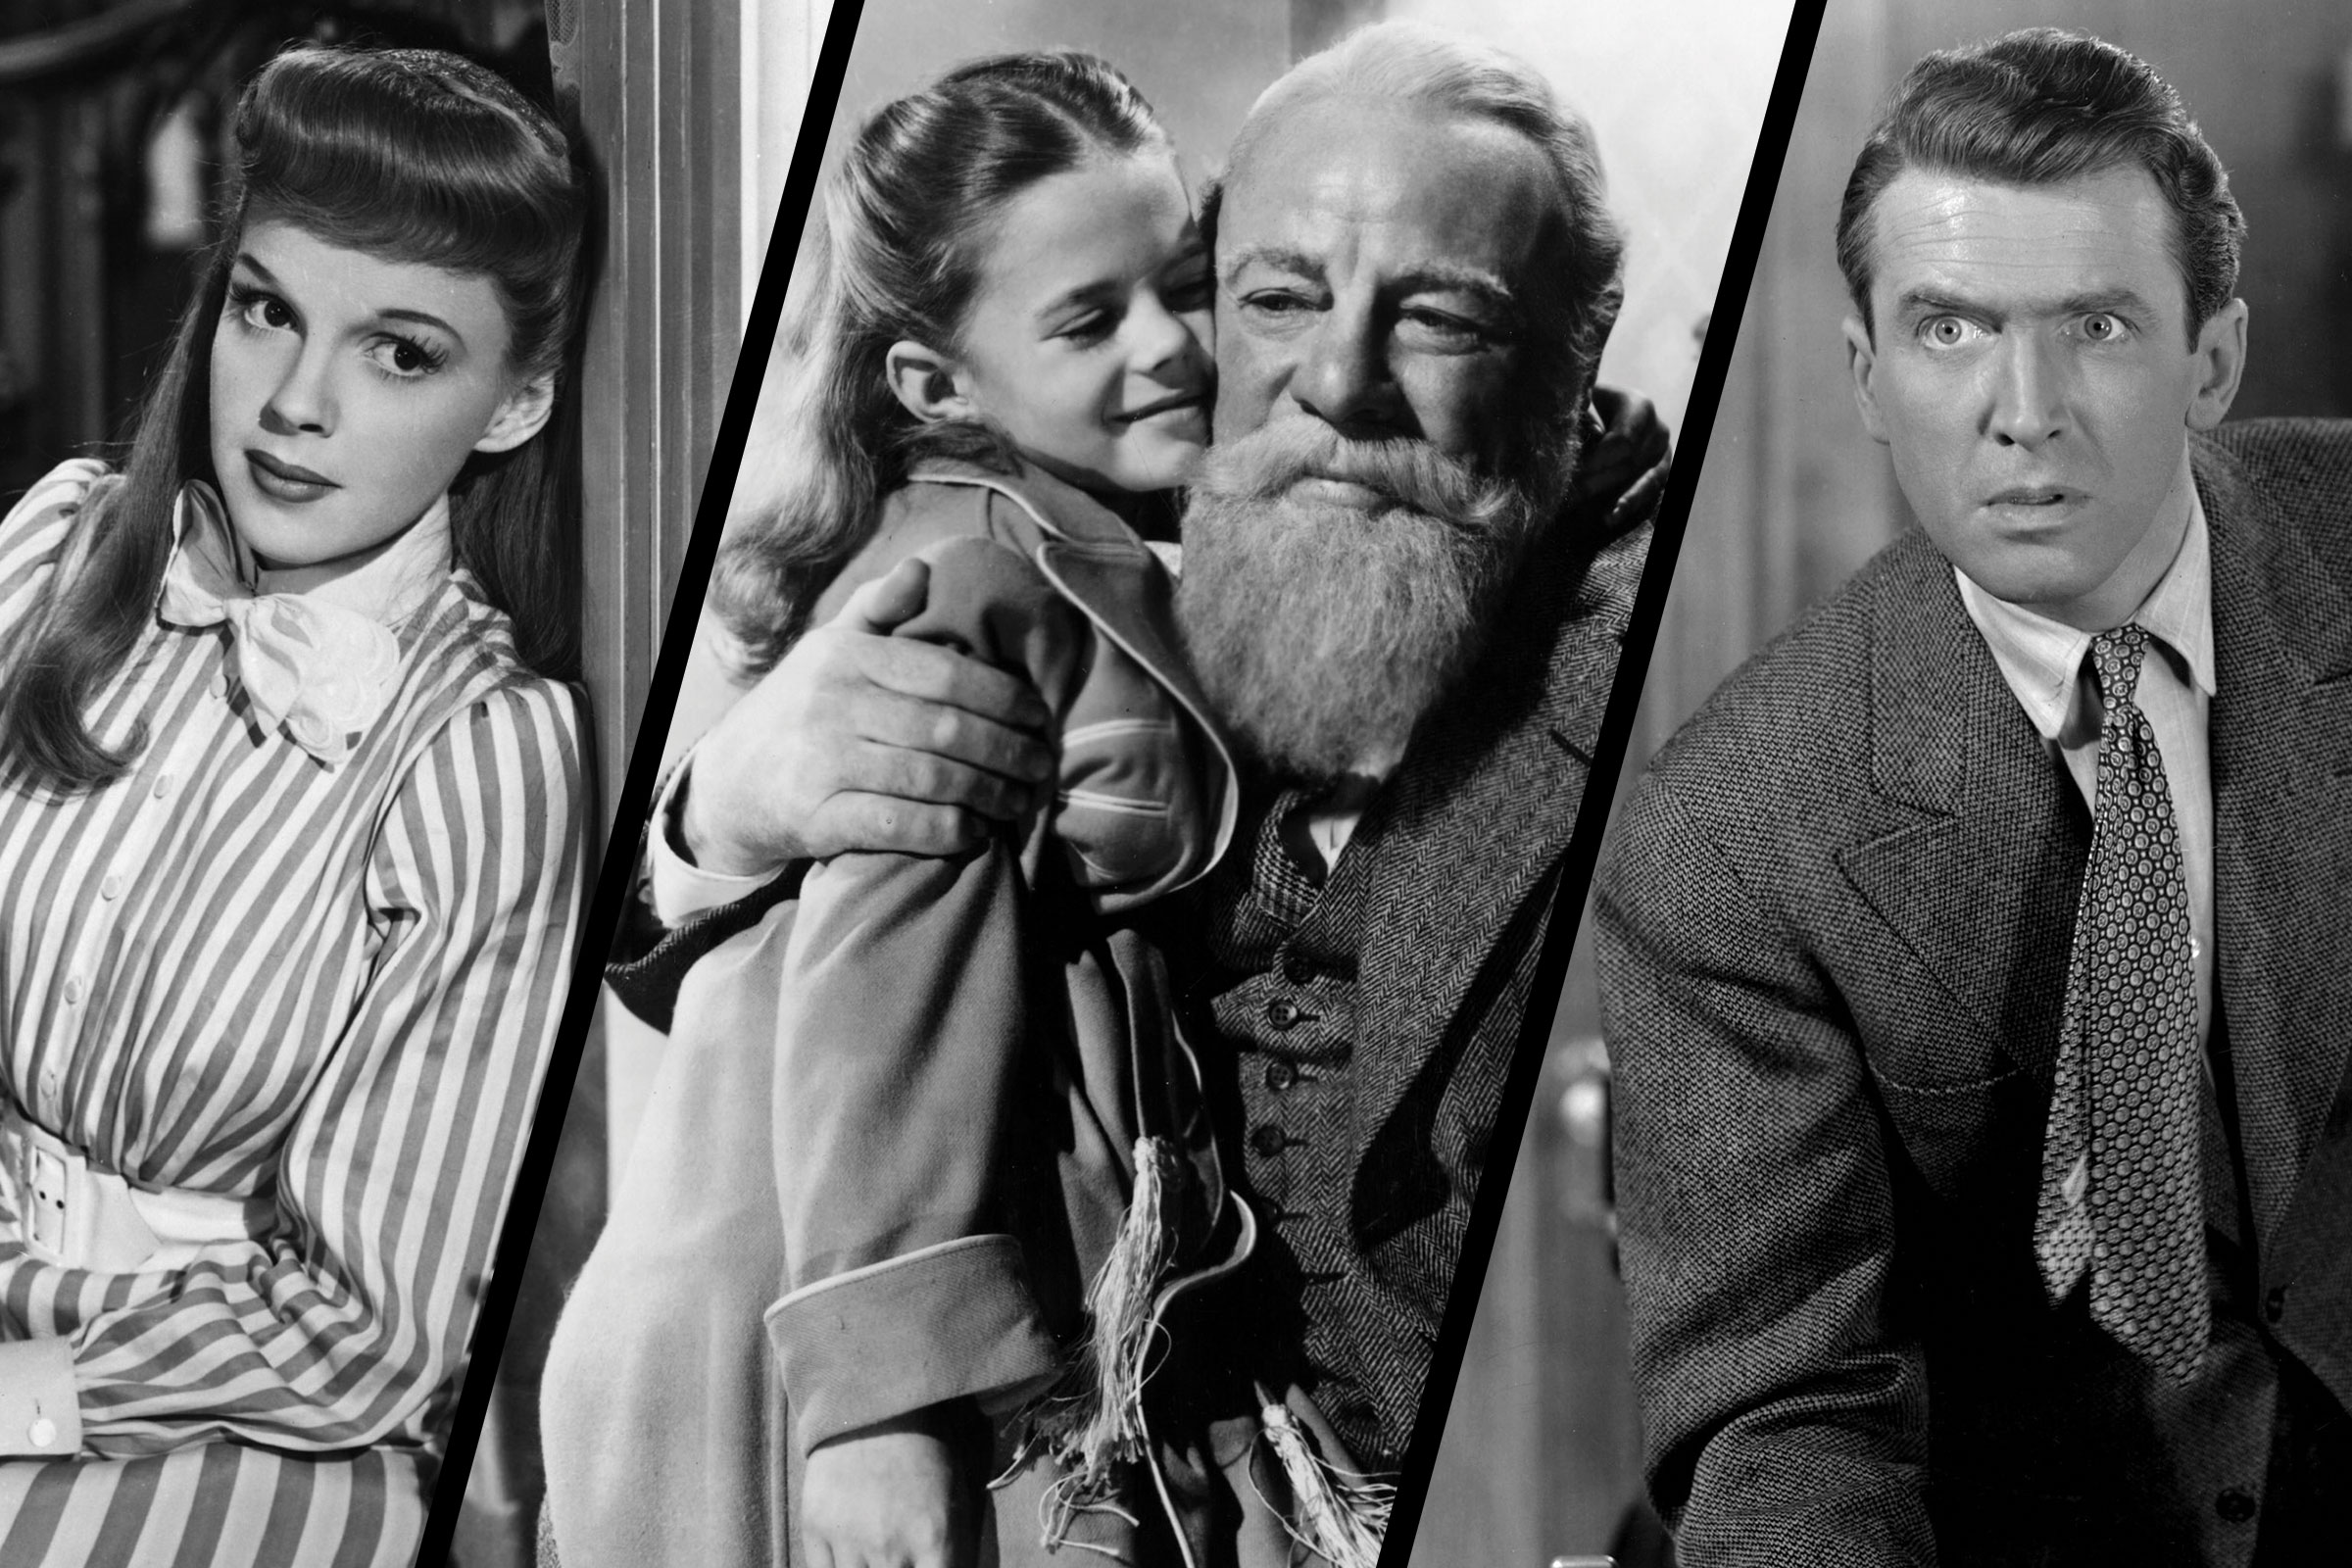 From left: Judy Garland in Meet Me in St. Louis, Natalie Wood in Miracle on 34th Street, Jimmy Stewart in It's a Wonderful Life (Getty Images, Everett Collection (2))